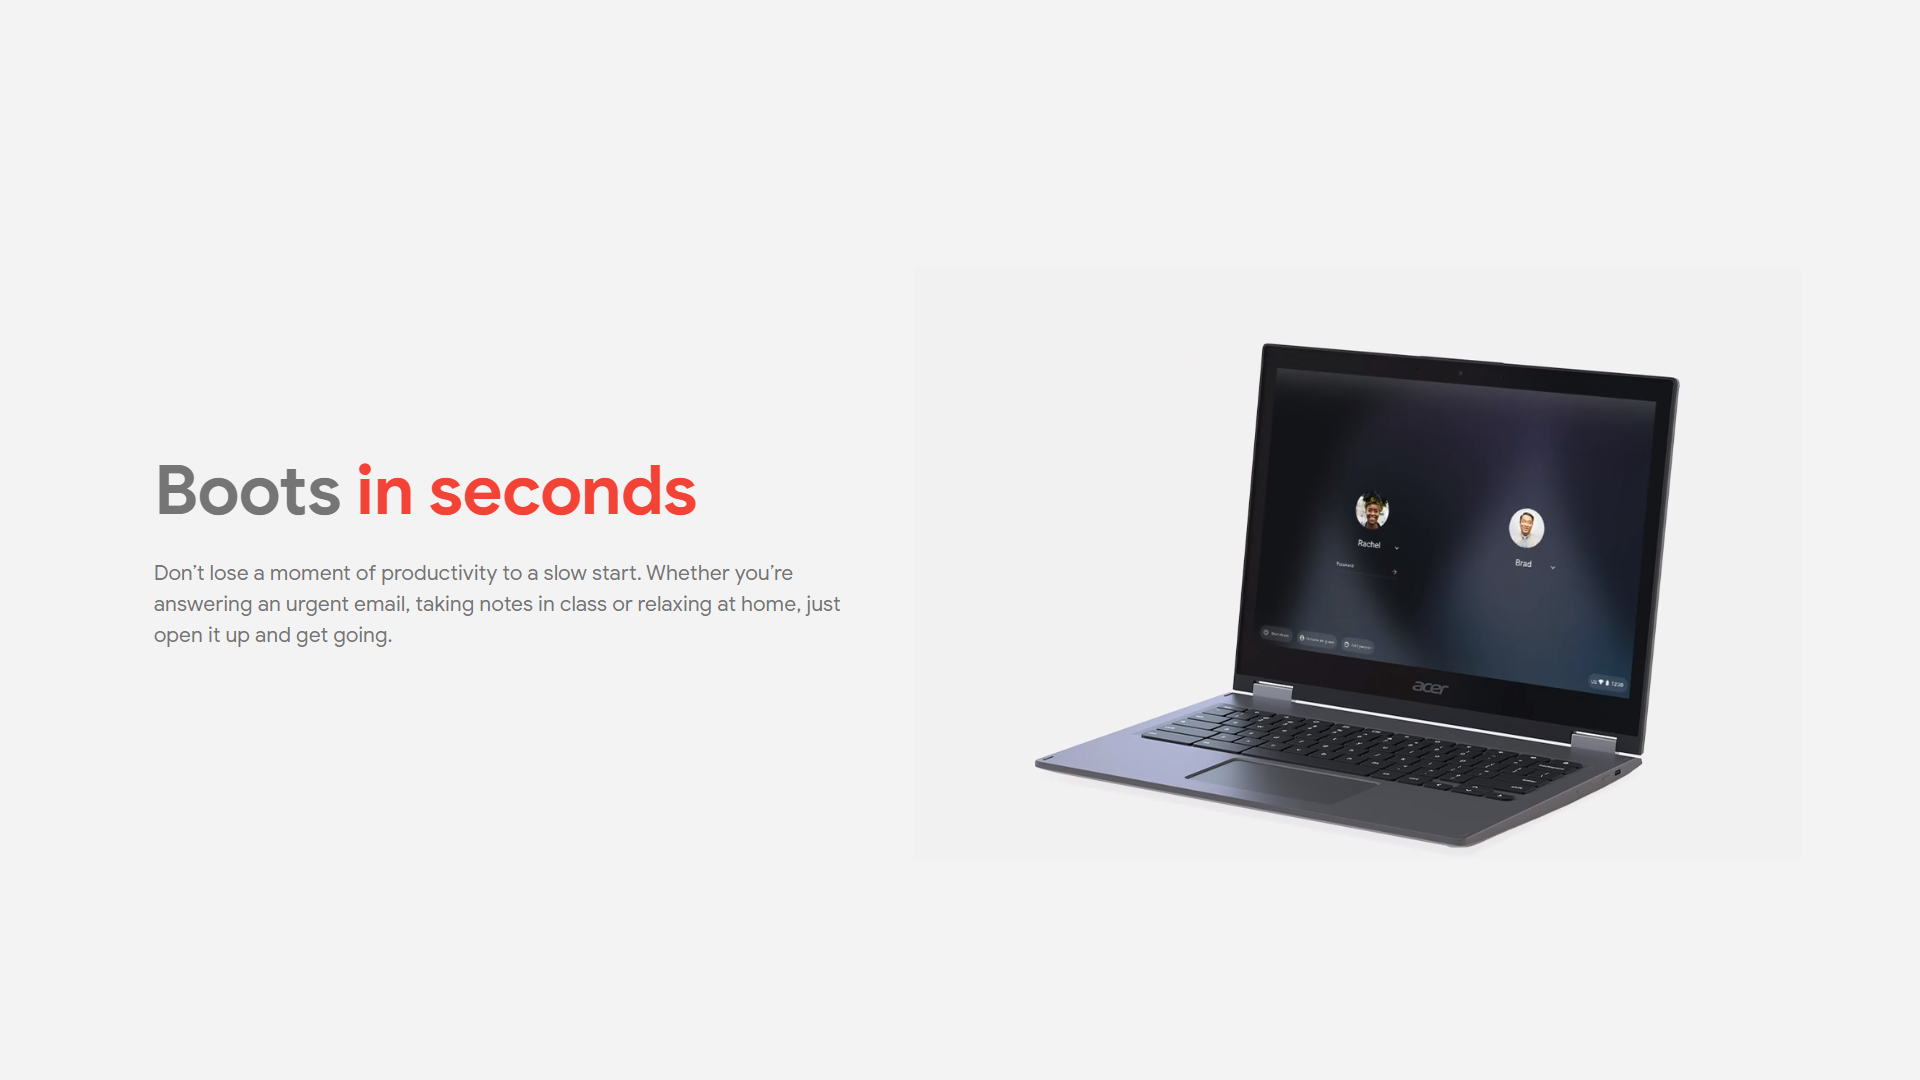 A promo image about Chromebooks booting up instantly